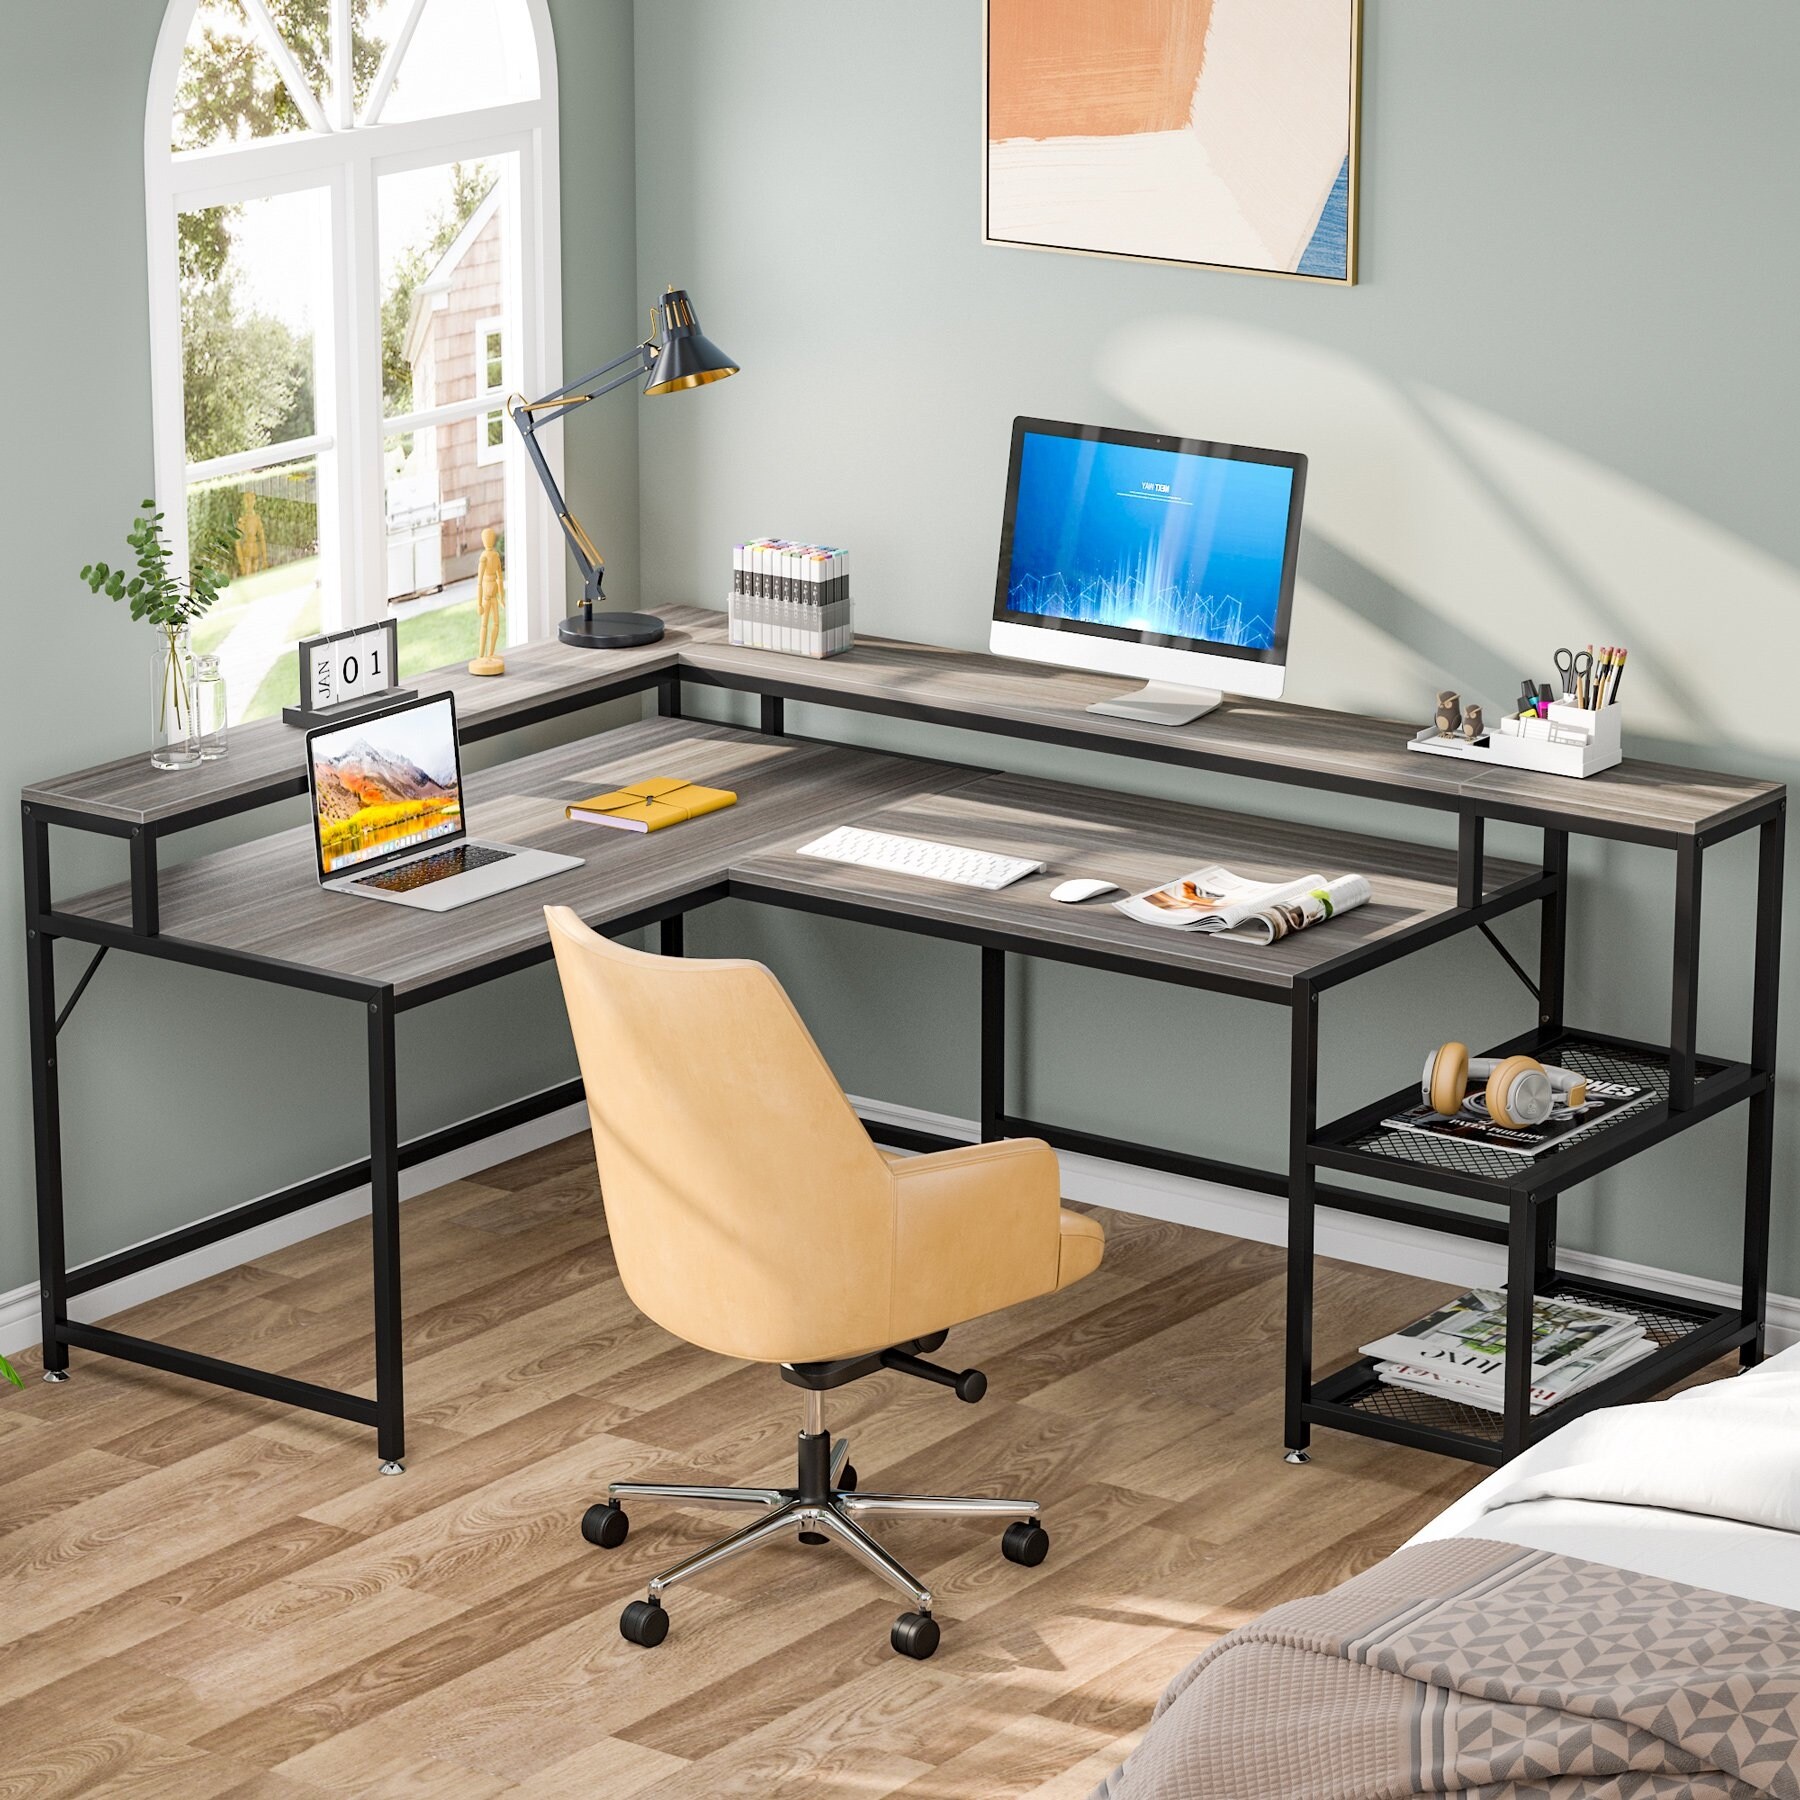 https://ak1.ostkcdn.com/images/products/is/images/direct/1a9aec7daa9fe10cb81d64540849fdc3f957ef8b/69%22-L-Shaped-Desk-with-Monitor-Shelf%2C-Reversible-Corner-Desk-Industrial-Computer-Desk-for-Office-Home%2C-Rustic-Brown.jpg